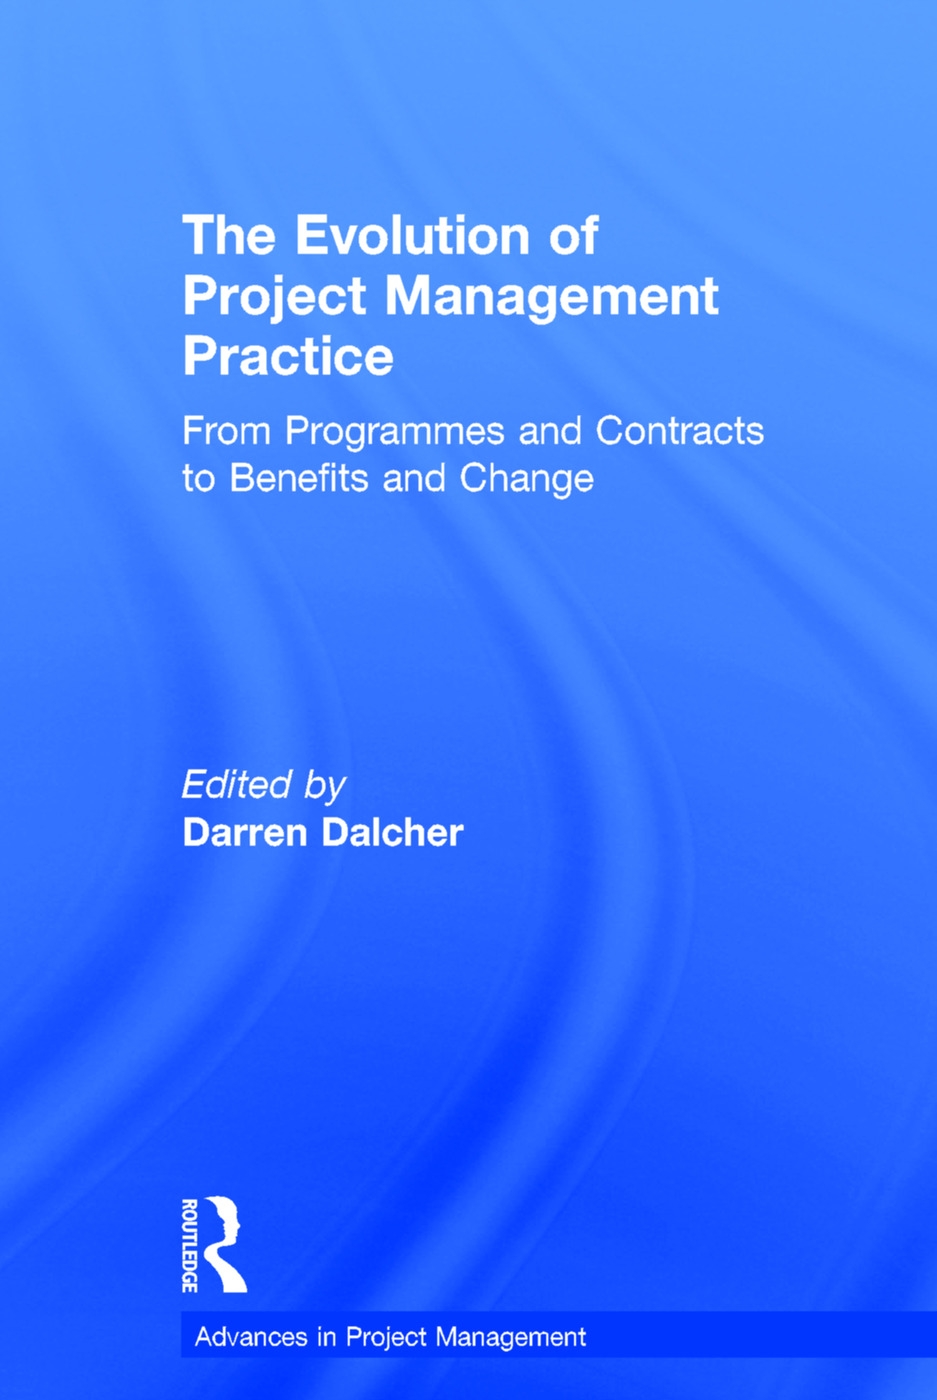 The Evolution of Project Management Practice: From Programmes and Contracts to Benefits and Change